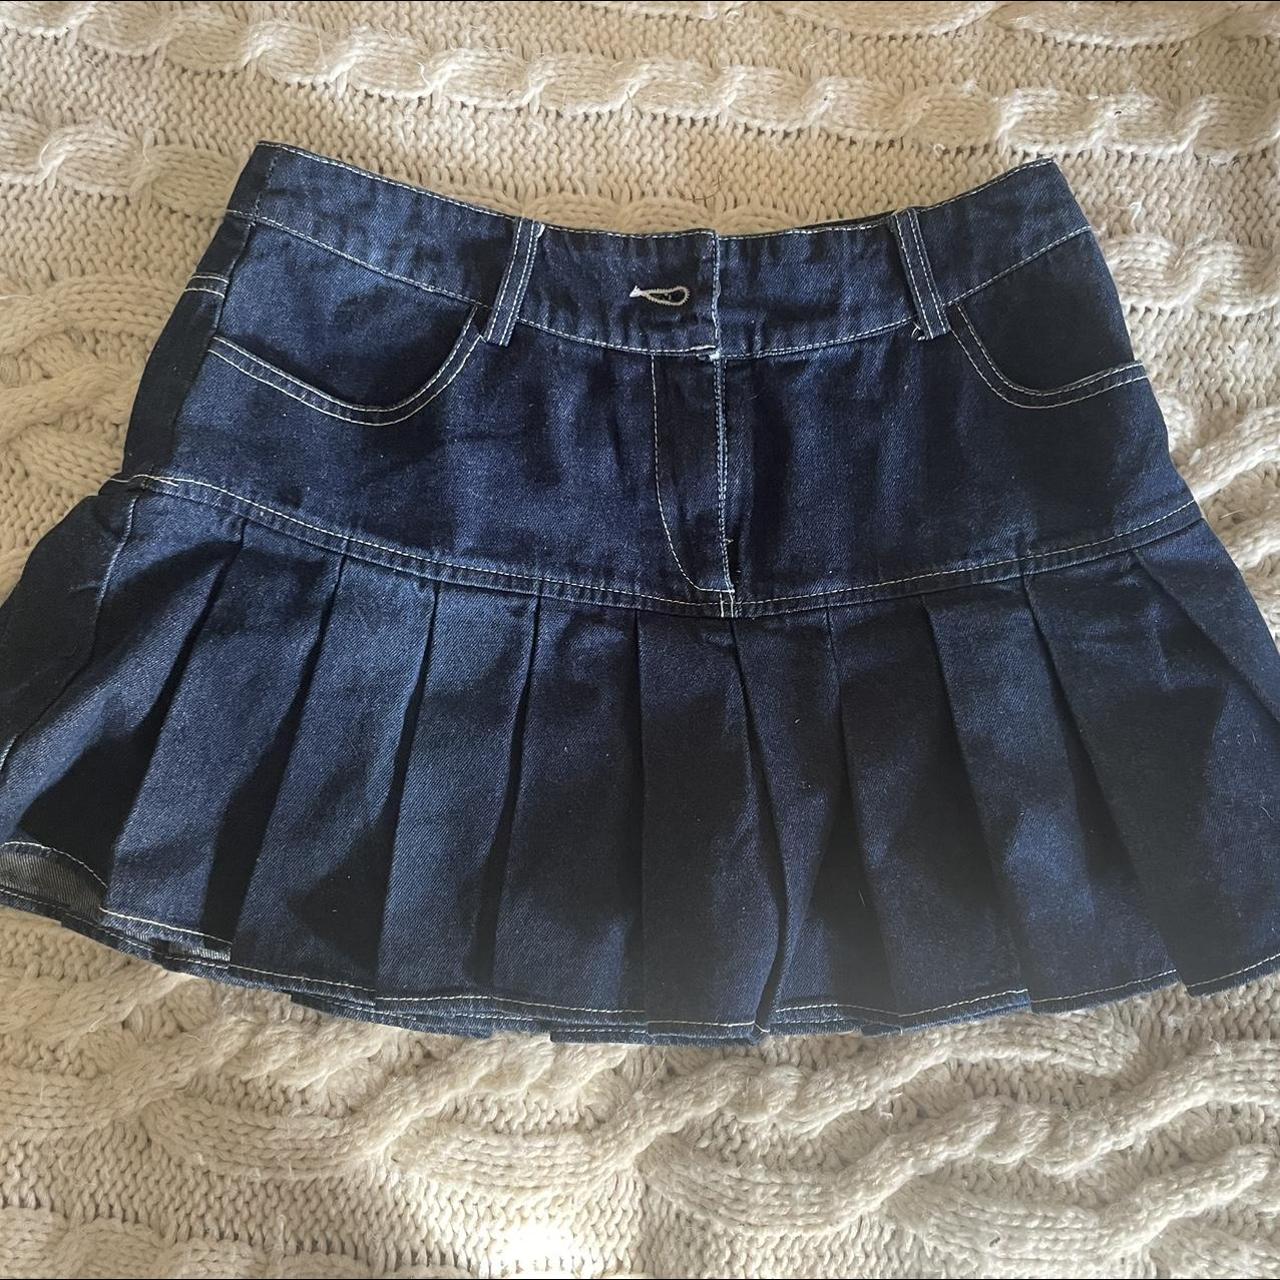 Mini y2k skirt Built in shorts *pinned at the back... - Depop